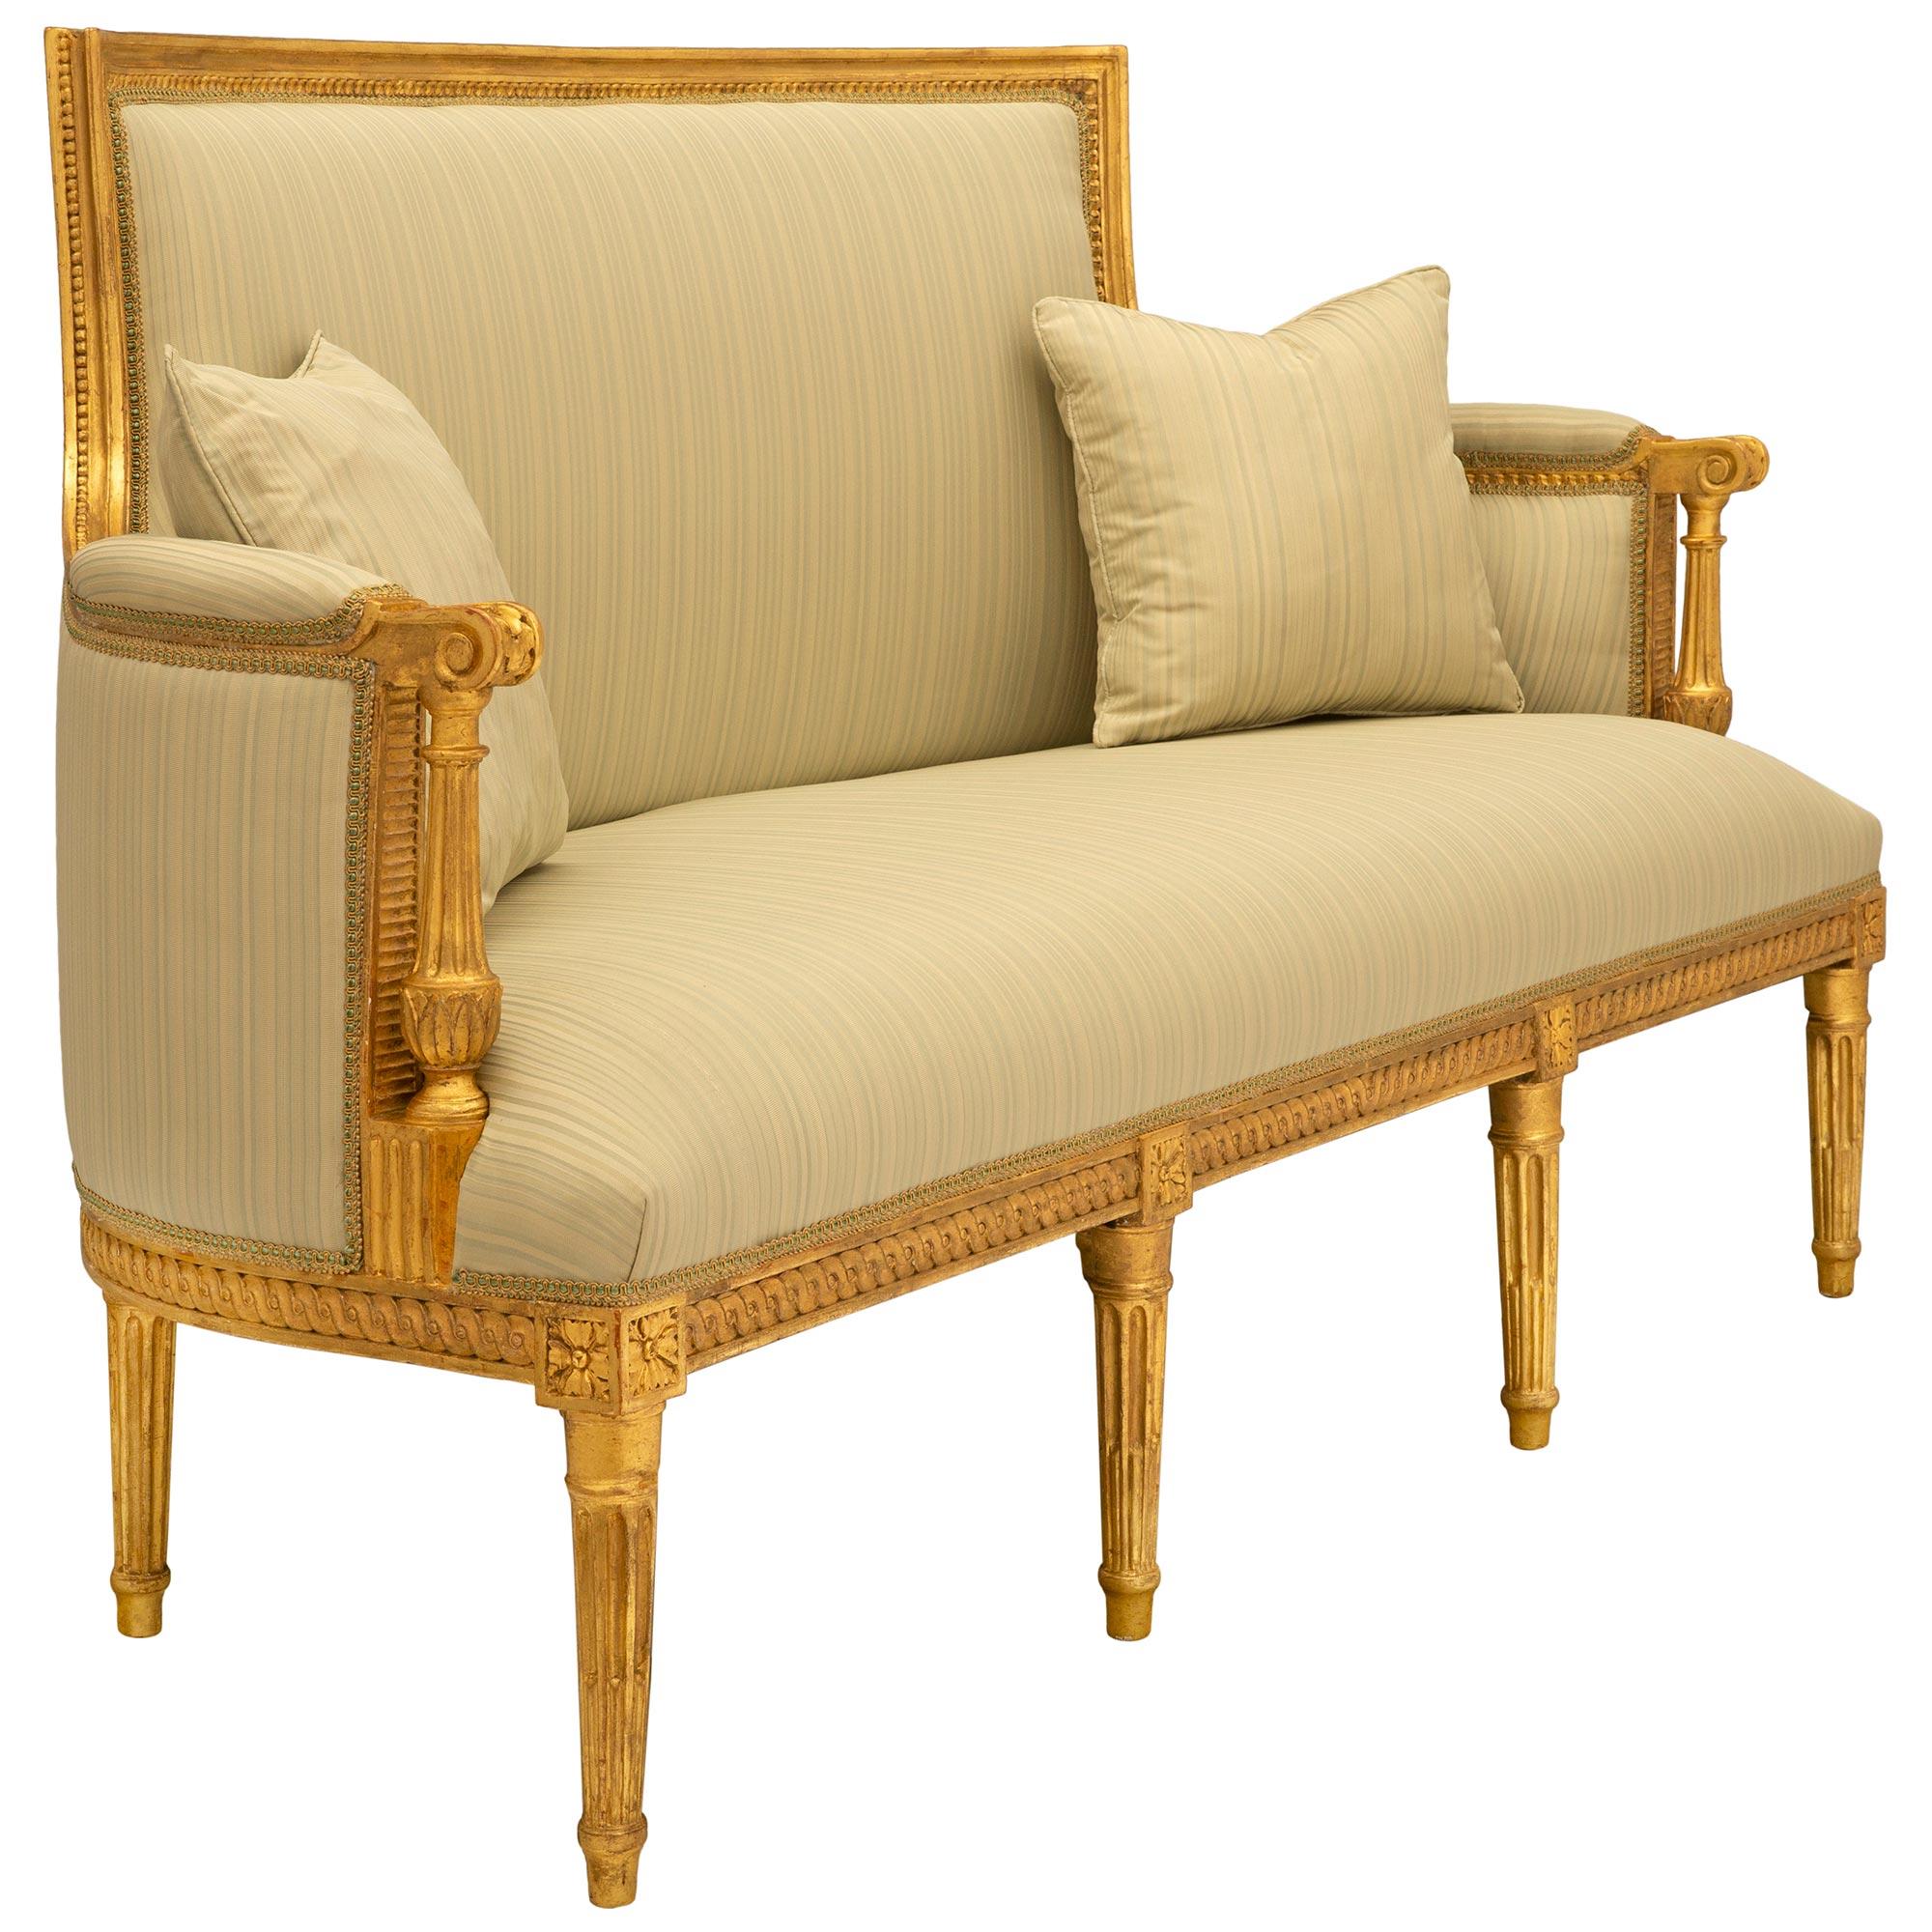 A beautiful and extremely elegant French 18th century Louis XVI period giltwood canapé settee. The settee is raised by seven delicate circular tapered fluted legs below striking block rosettes flanking richly carved recessed interlocking designs